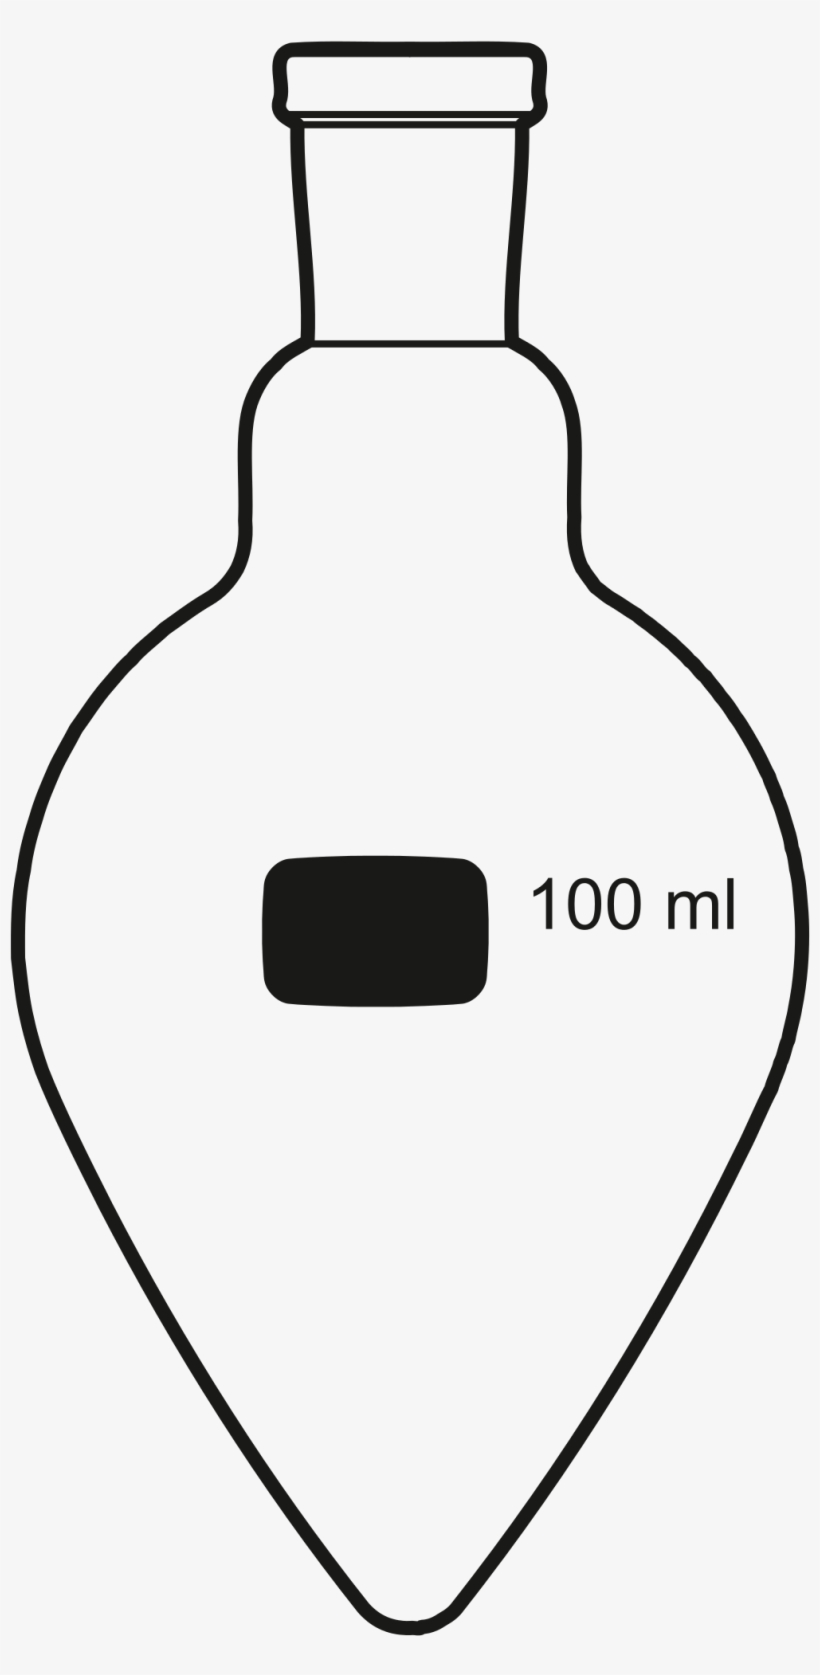 2000 X 2500 1 - Pear Shaped Flask Png, transparent png #8752915